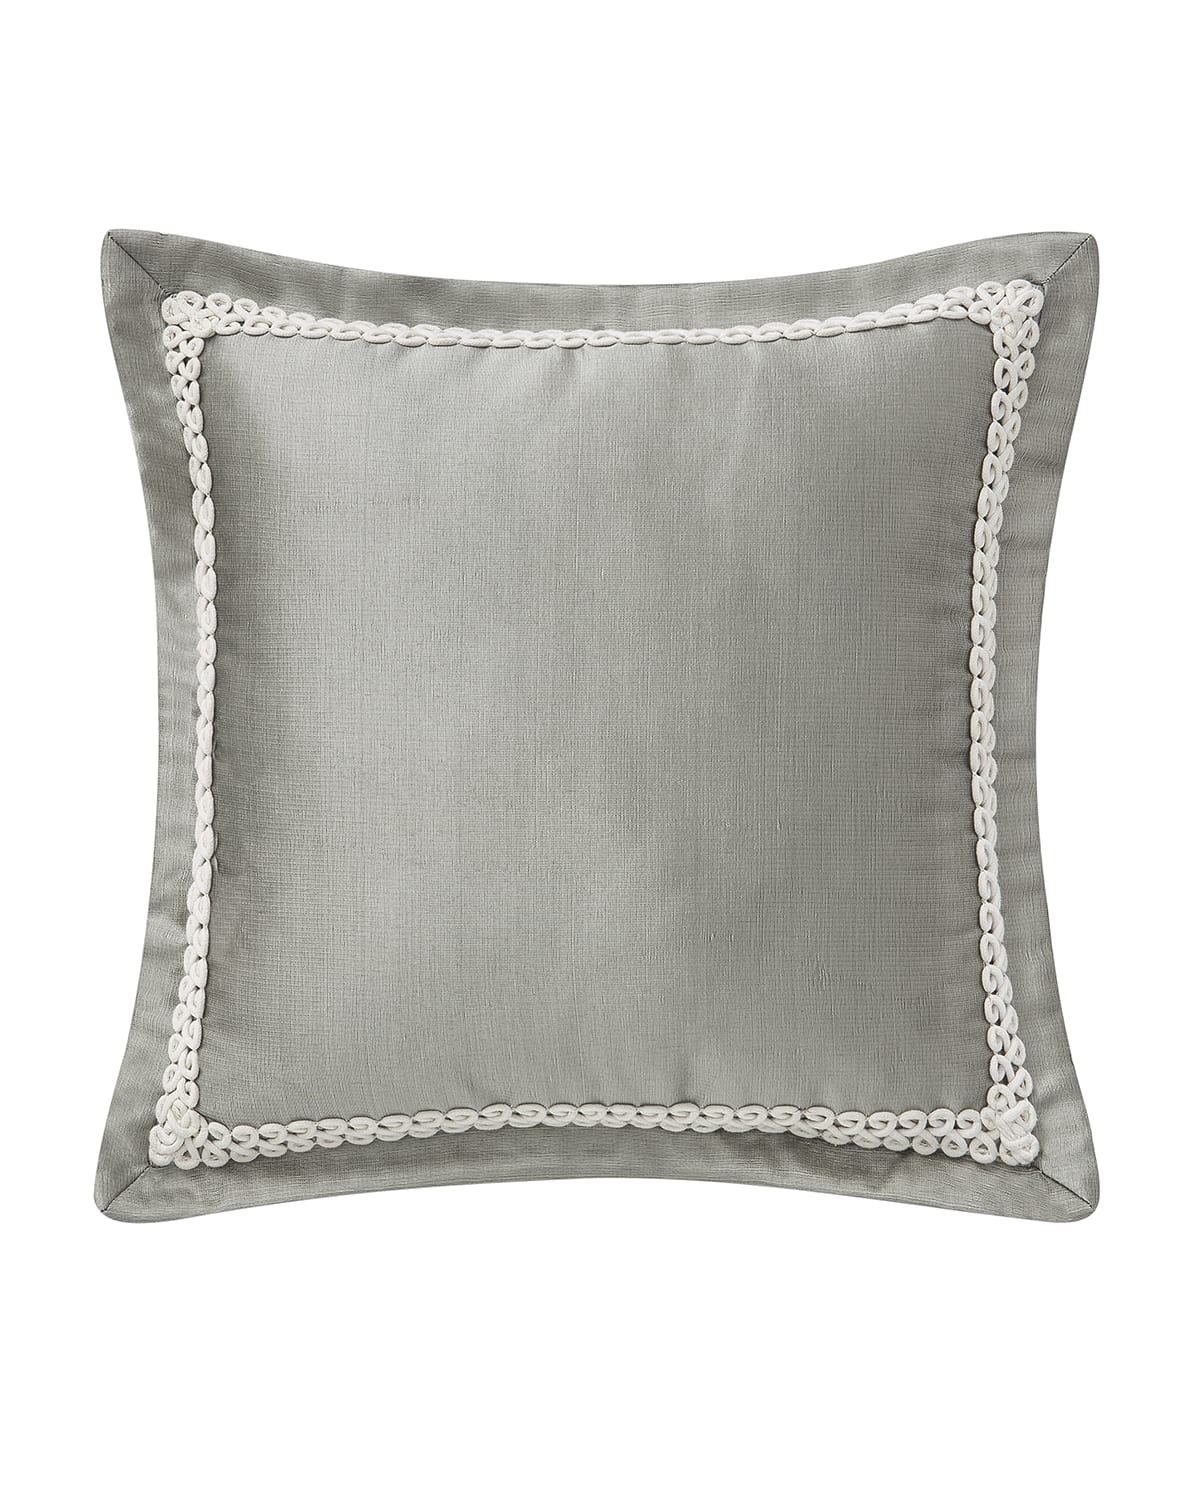 Image Waterford Celine Square Decorative Pillow, 16"Sq.